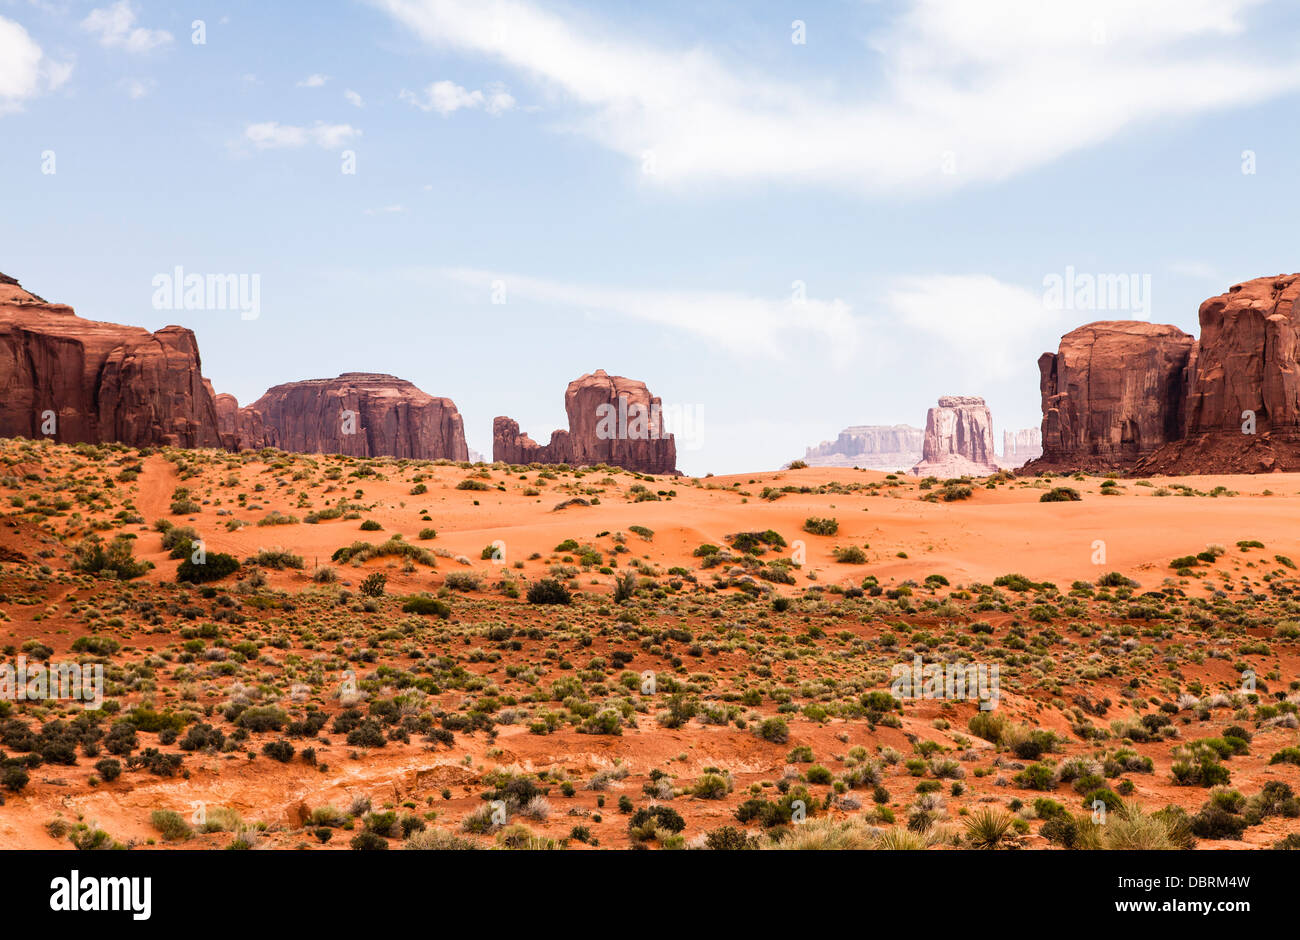 Monument Valley mesa on the red and arid Colorado Plateau desert, straddling the Arizona-Utah state line, South West USA Stock Photo